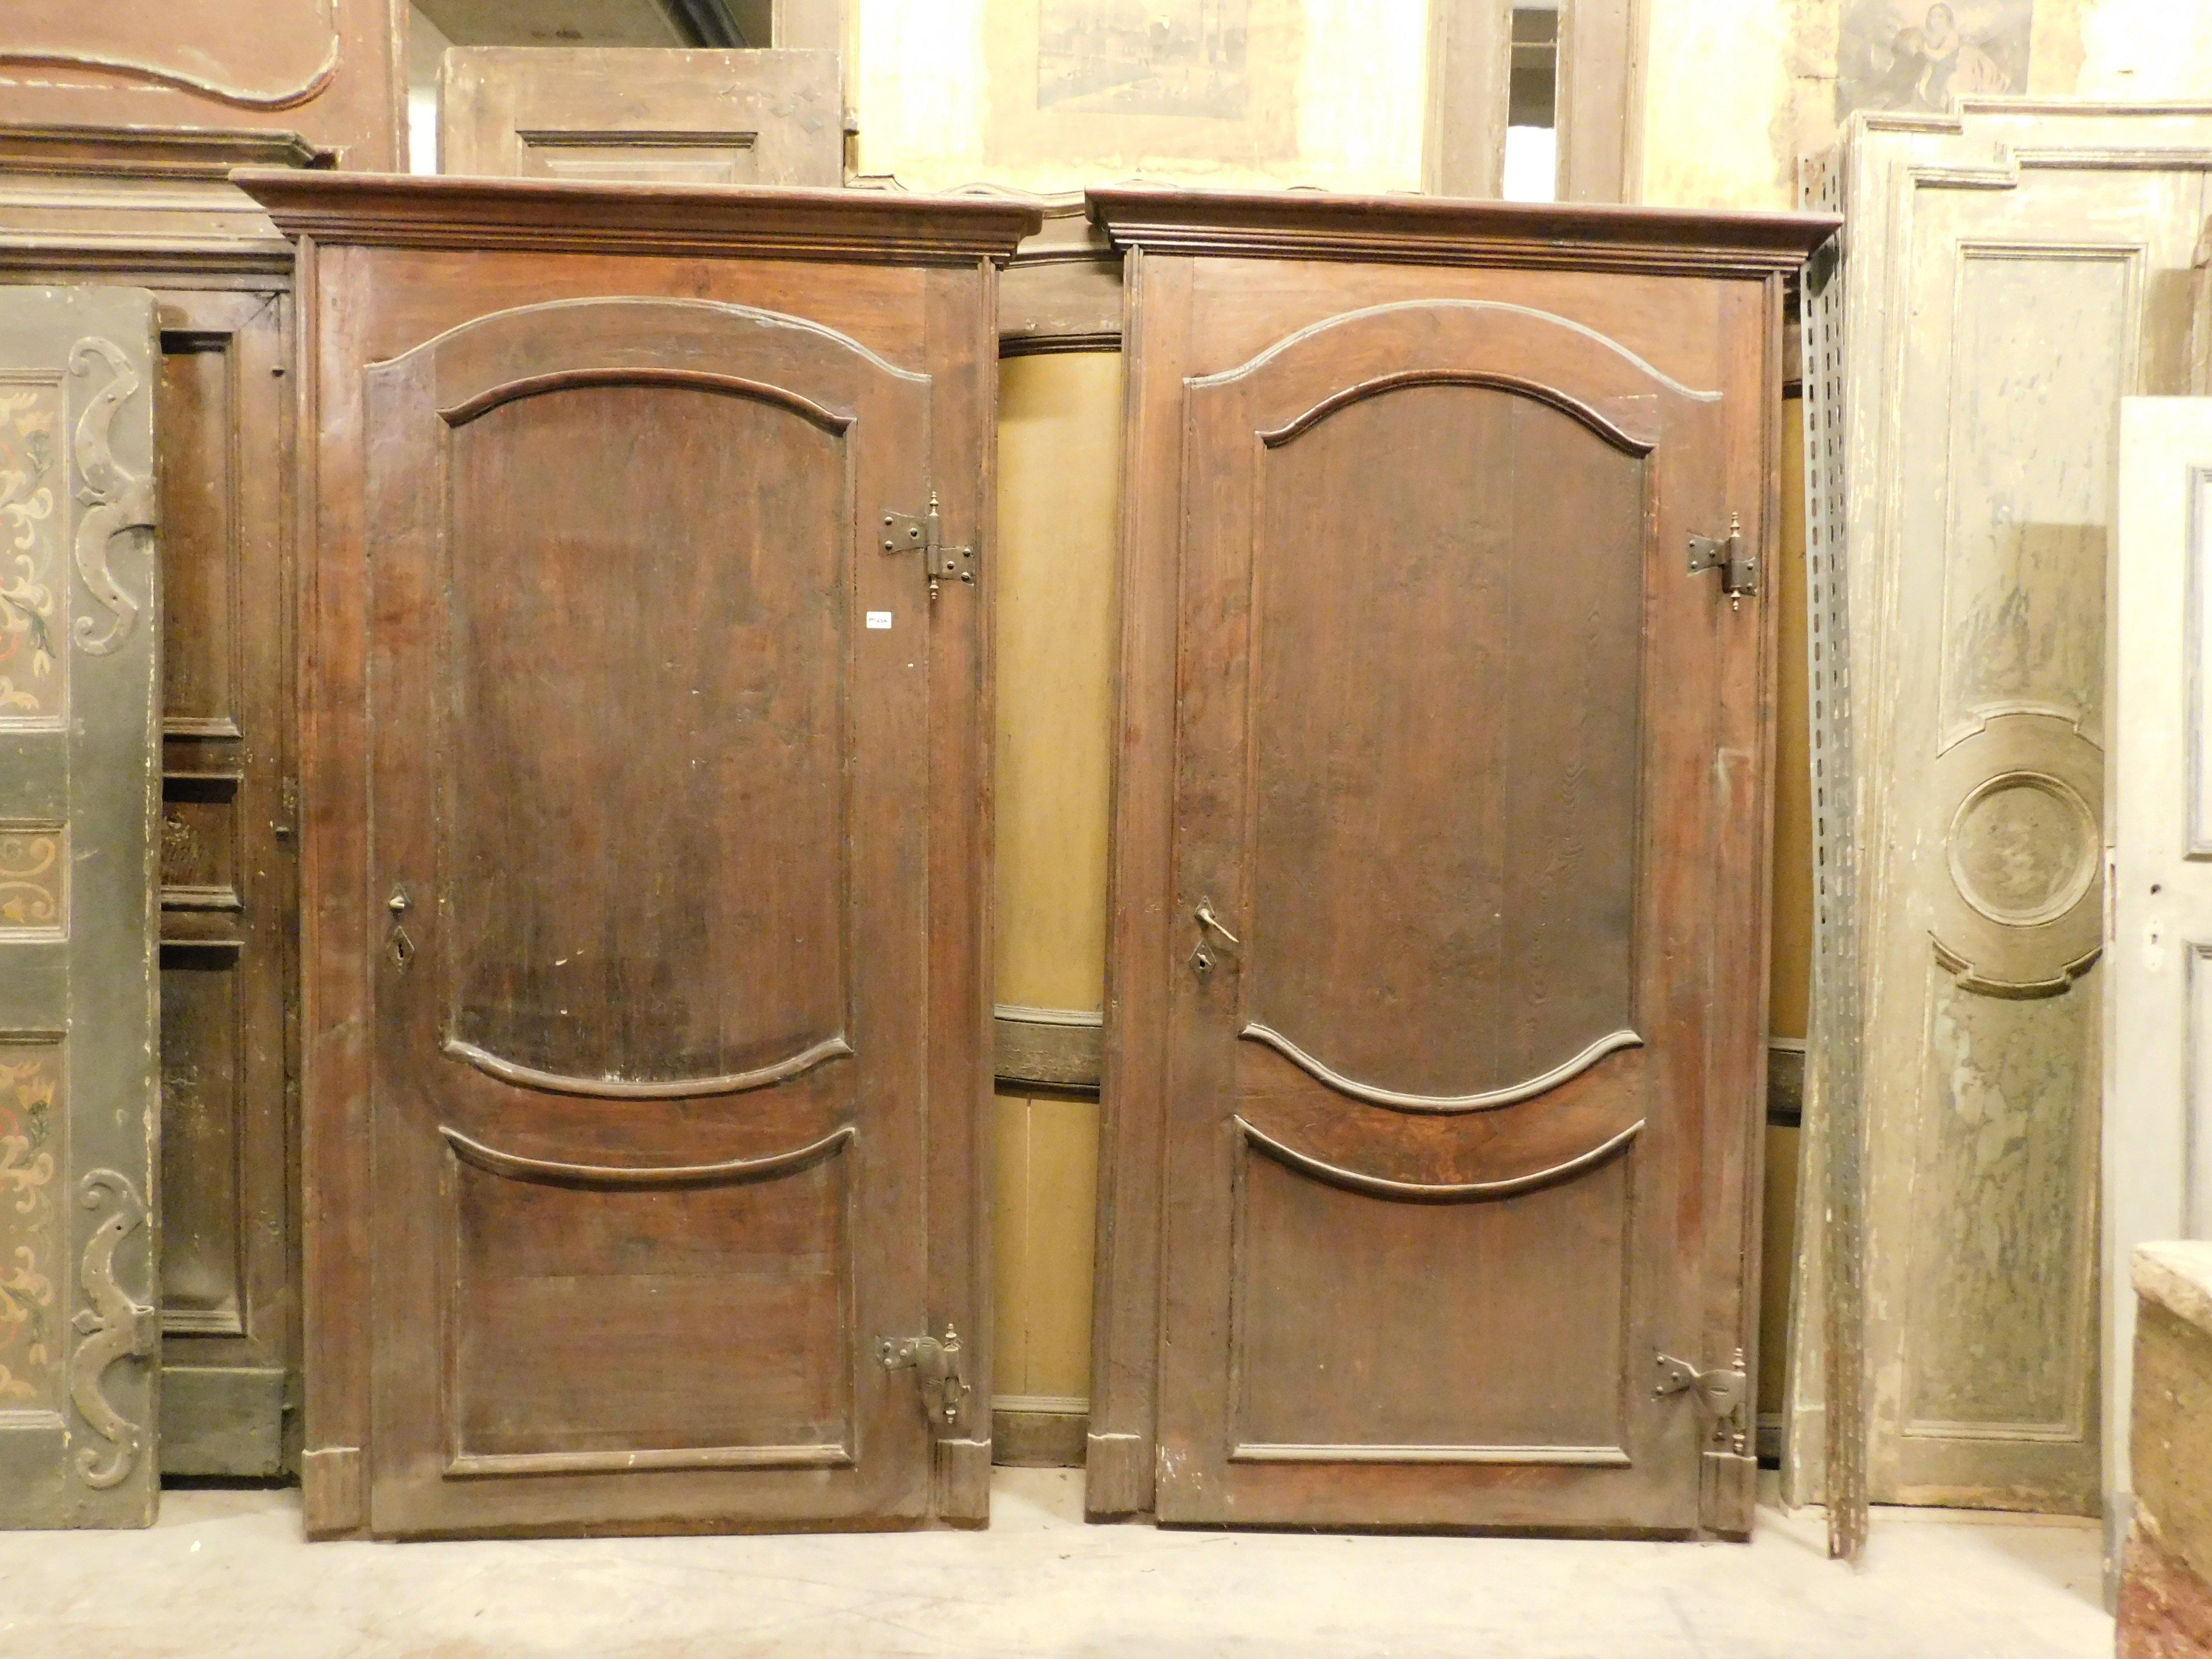 set of N. 2 antique doors in solid poplar wood, hand-carved with baroque wavy panel and complete with original frame, internal doors with a curved leaf, Complete with original frame and irons, Pull opening to the right, Smooth back, From the 18th